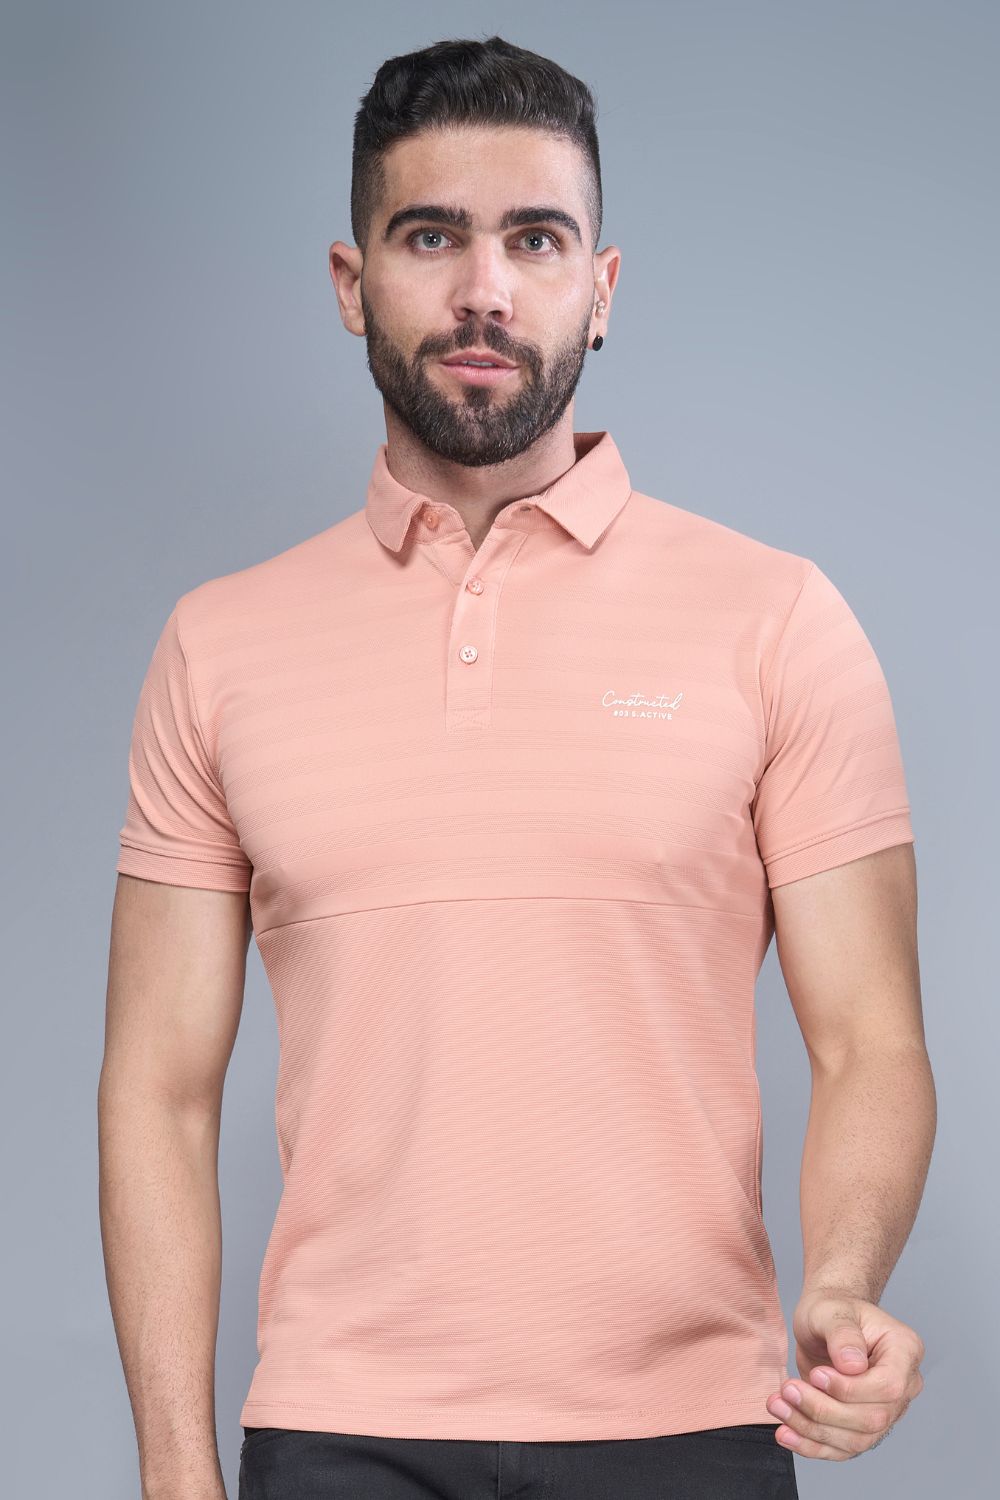 Cafe cream colored, constructed polo T shirt for men with half sleeves and collar, front view.